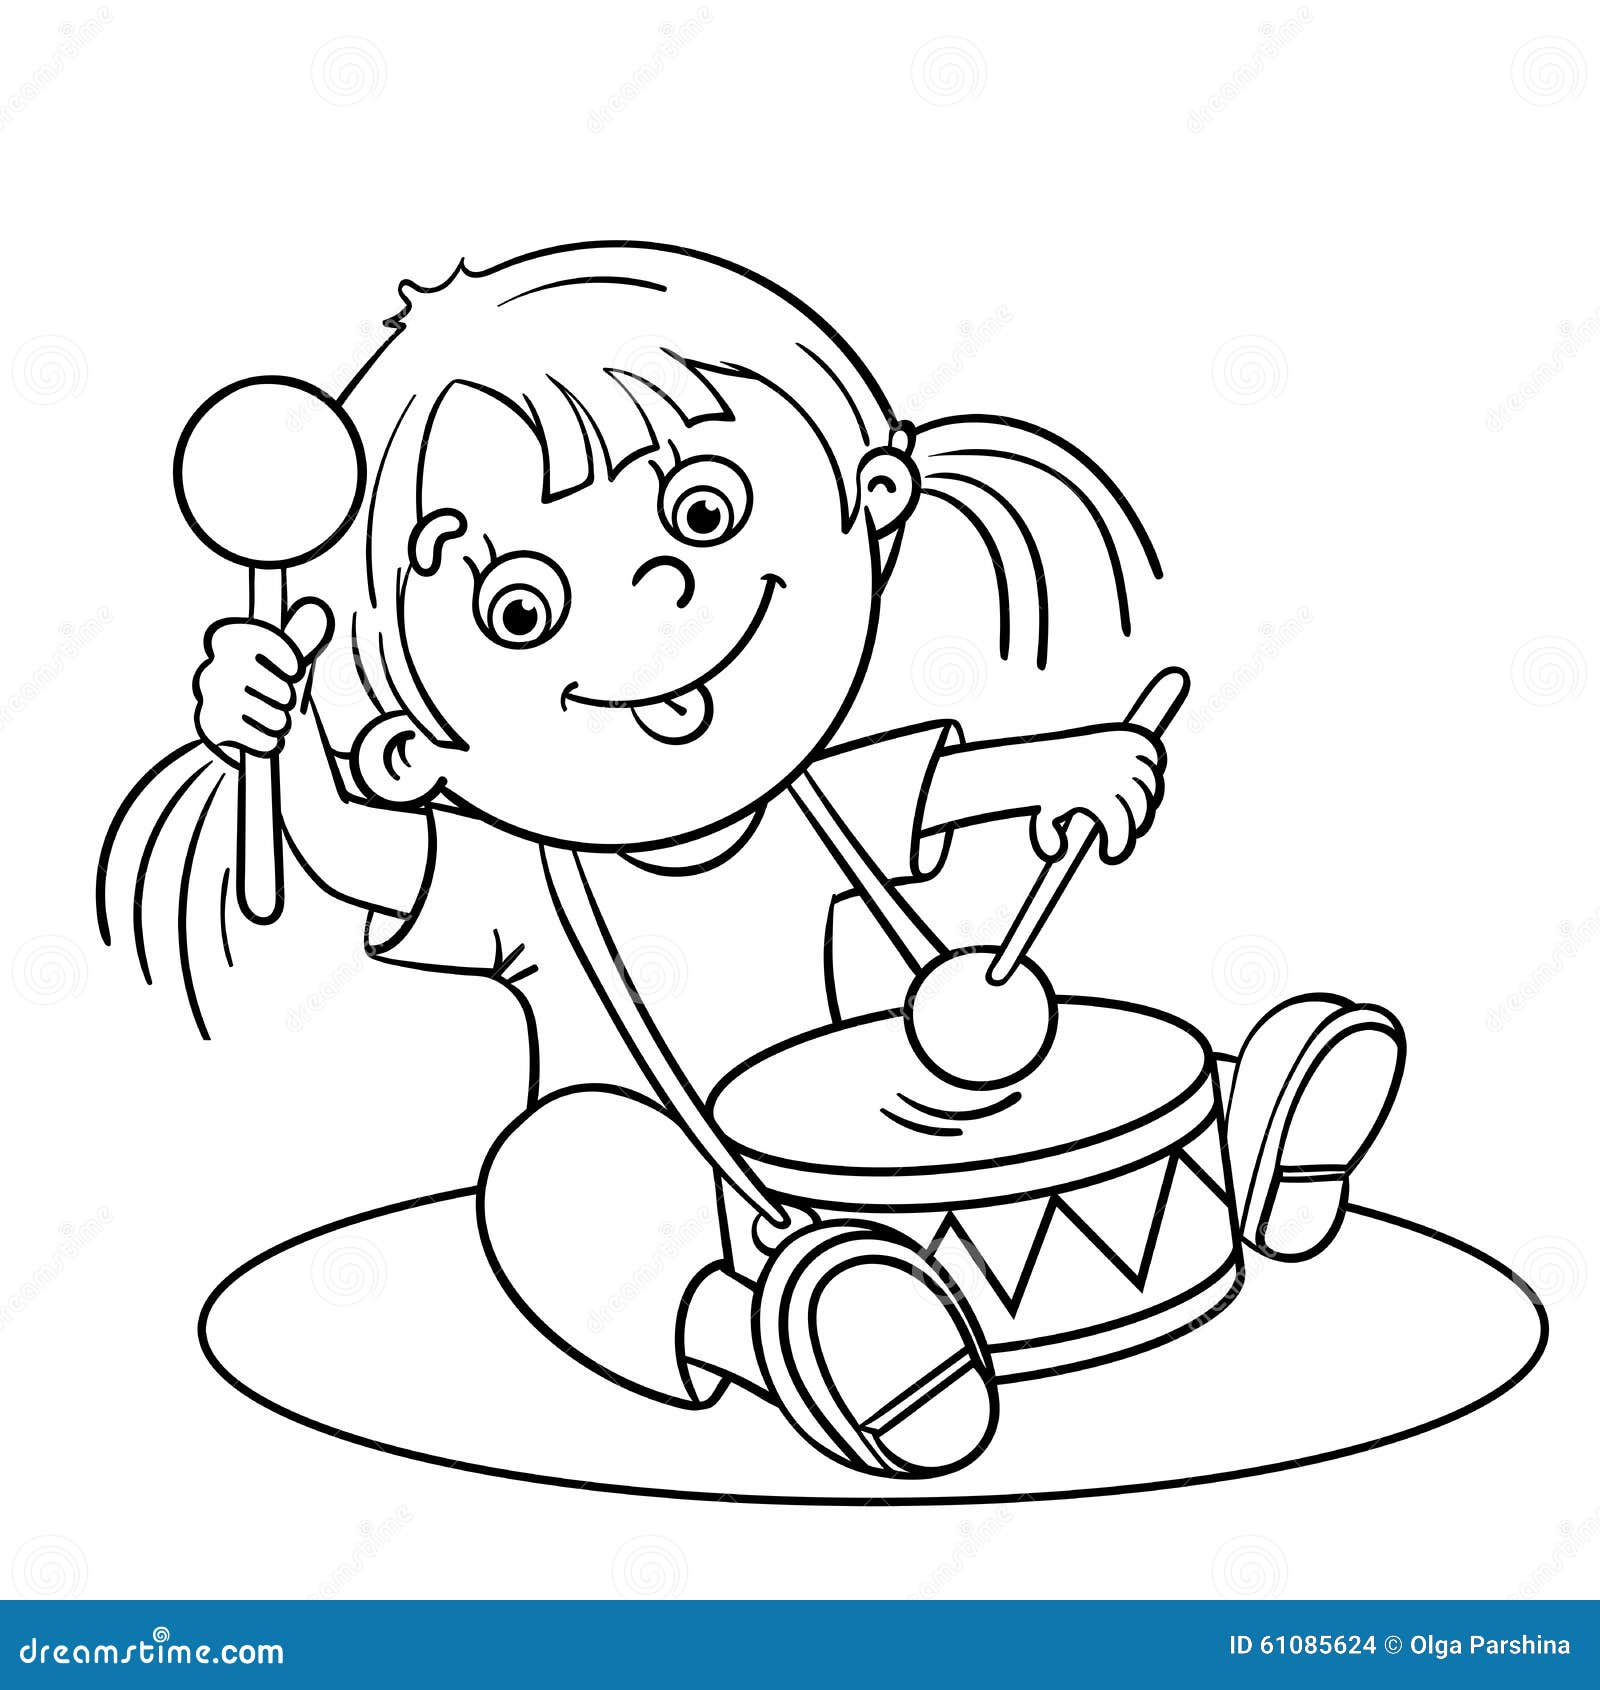 Coloring Page Outline Of A Cartoon Girl Playing The Drum Stock